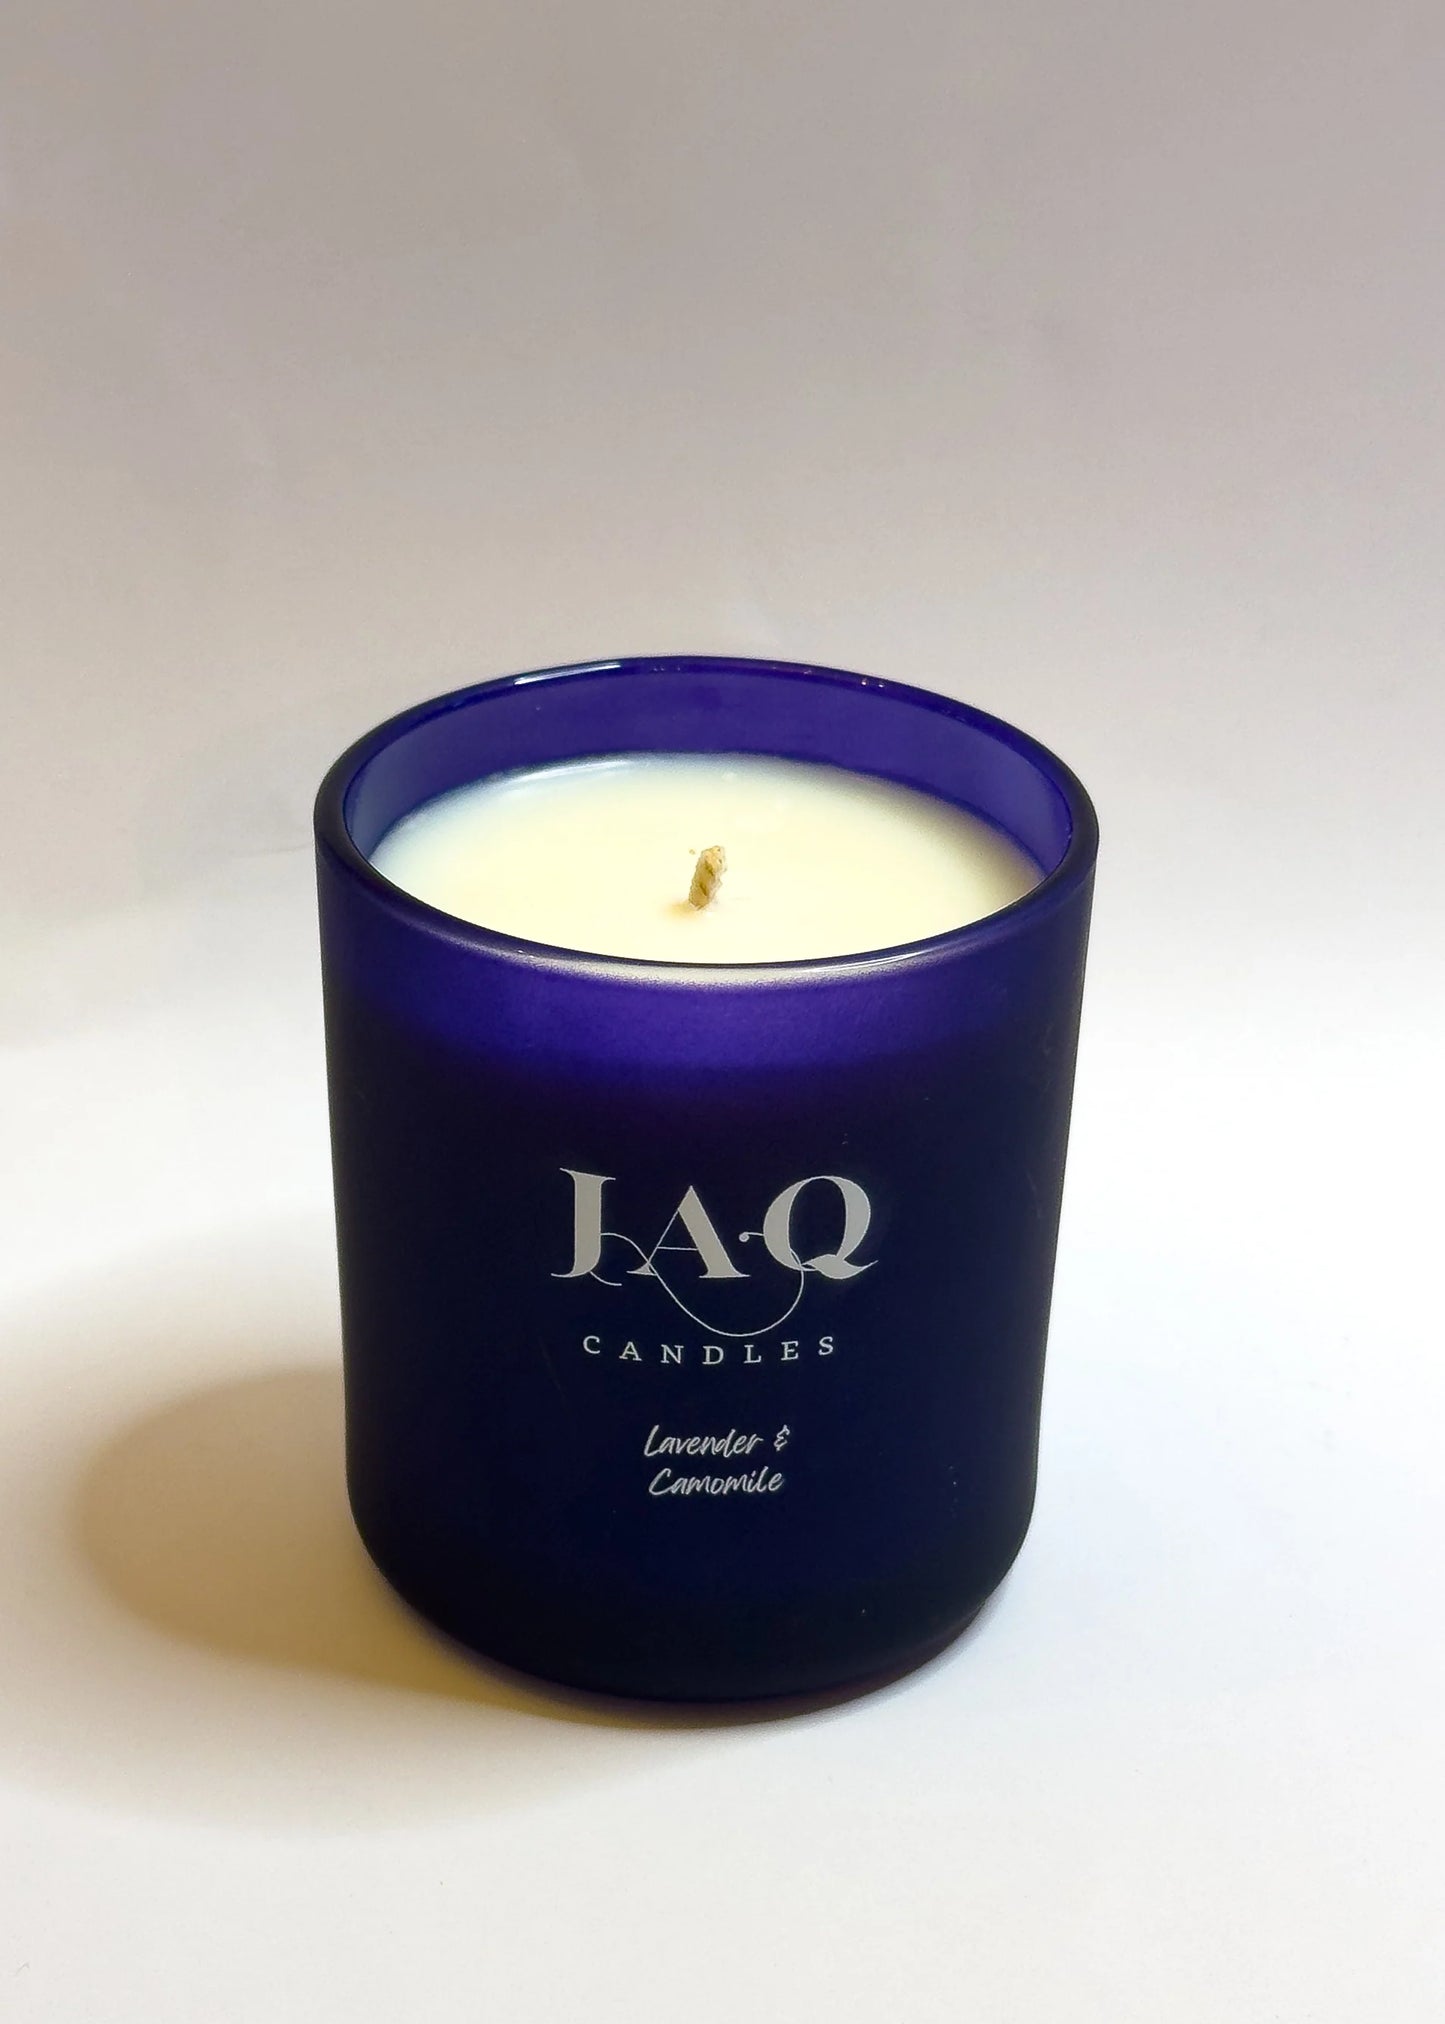 Lavender & Camomile Candle by JAQ Candles